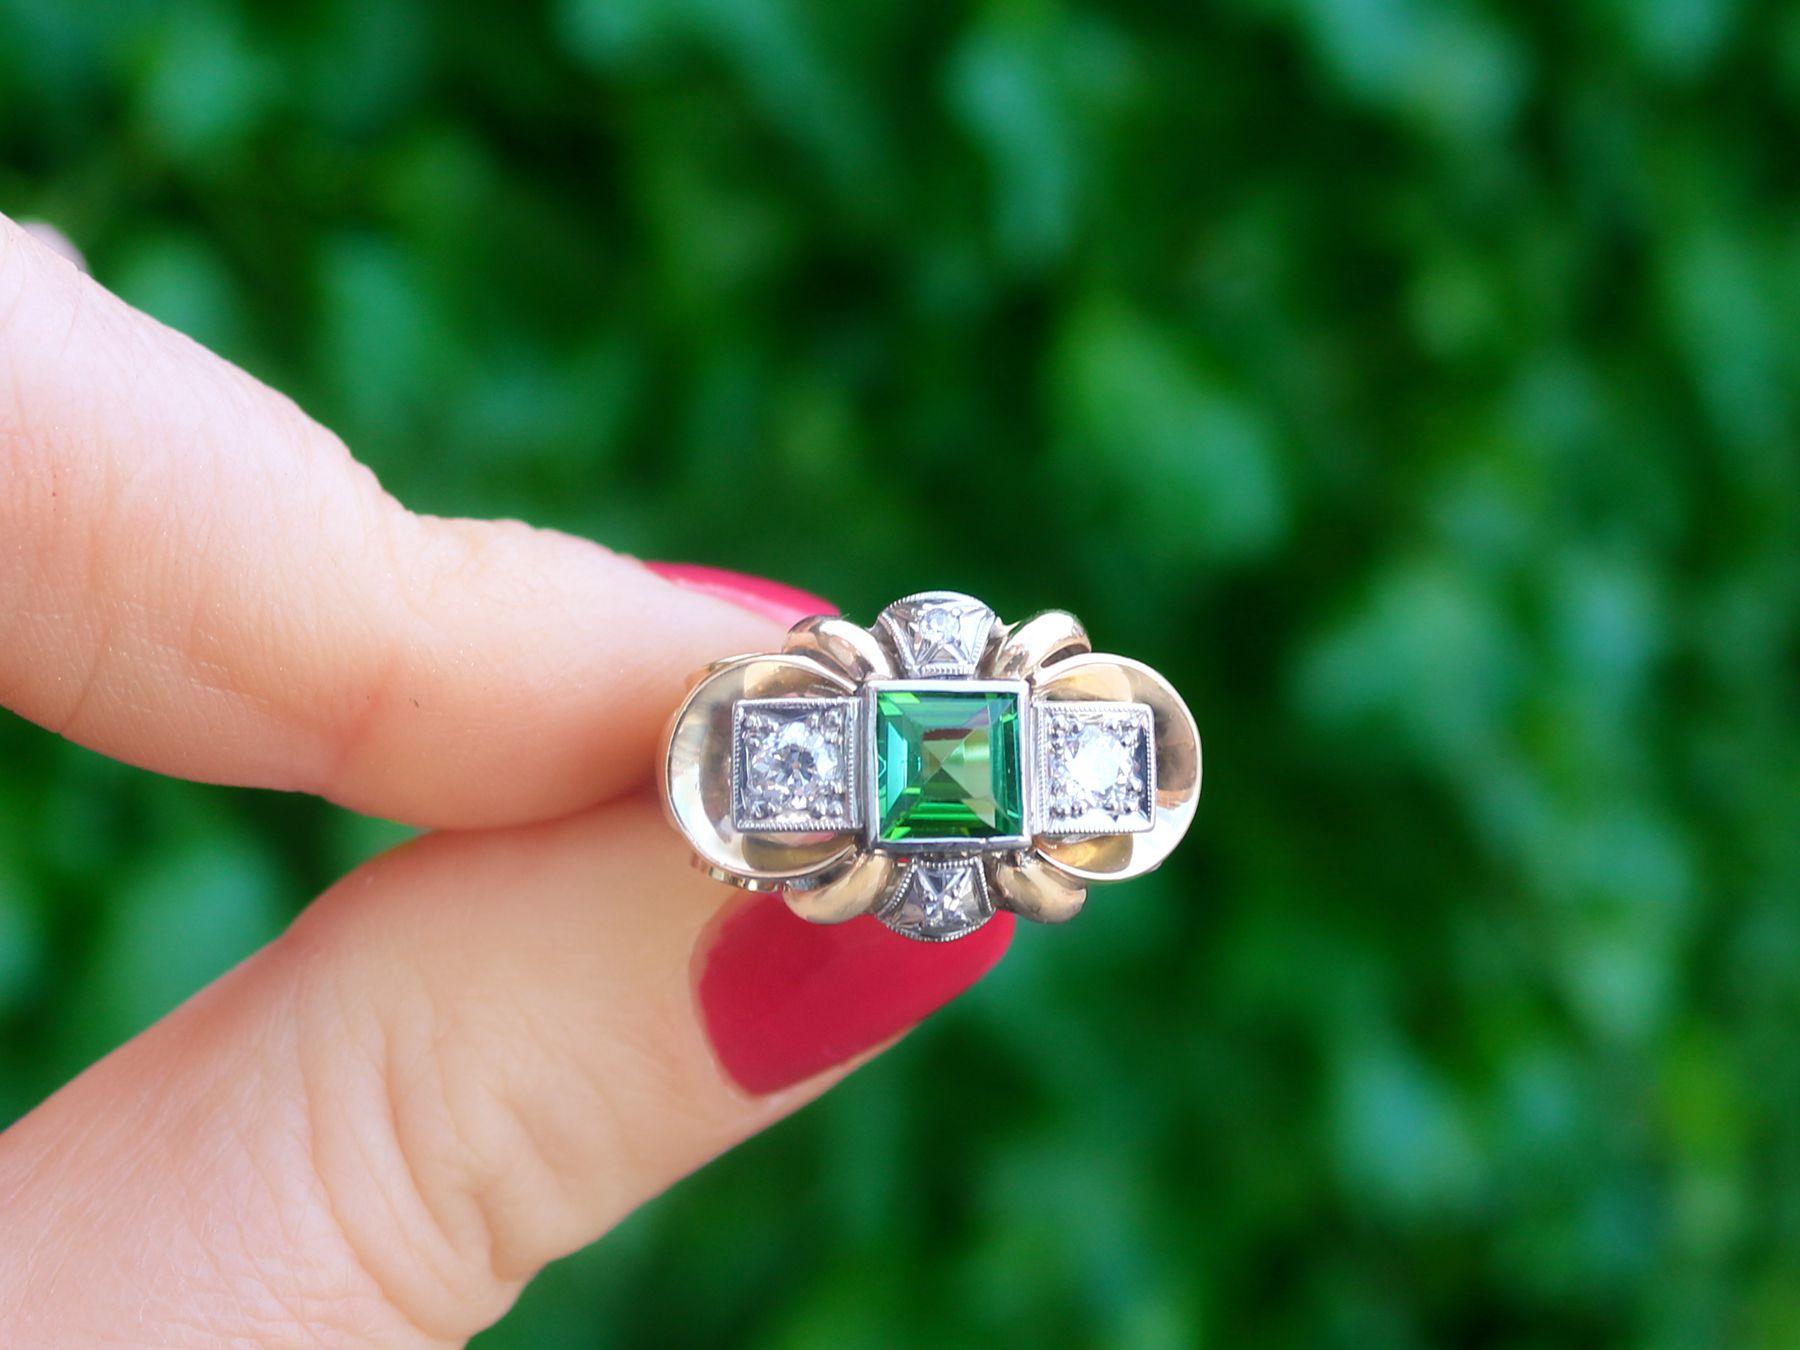 An impressive vintage 0.83 carat tourmaline and 0.45 carat diamond, 18k yellow and white gold dress ring; part of our diverse vintage jewelry and estate jewelry collections.

This fine and impressive vintage diamond and tourmaline dress ring has